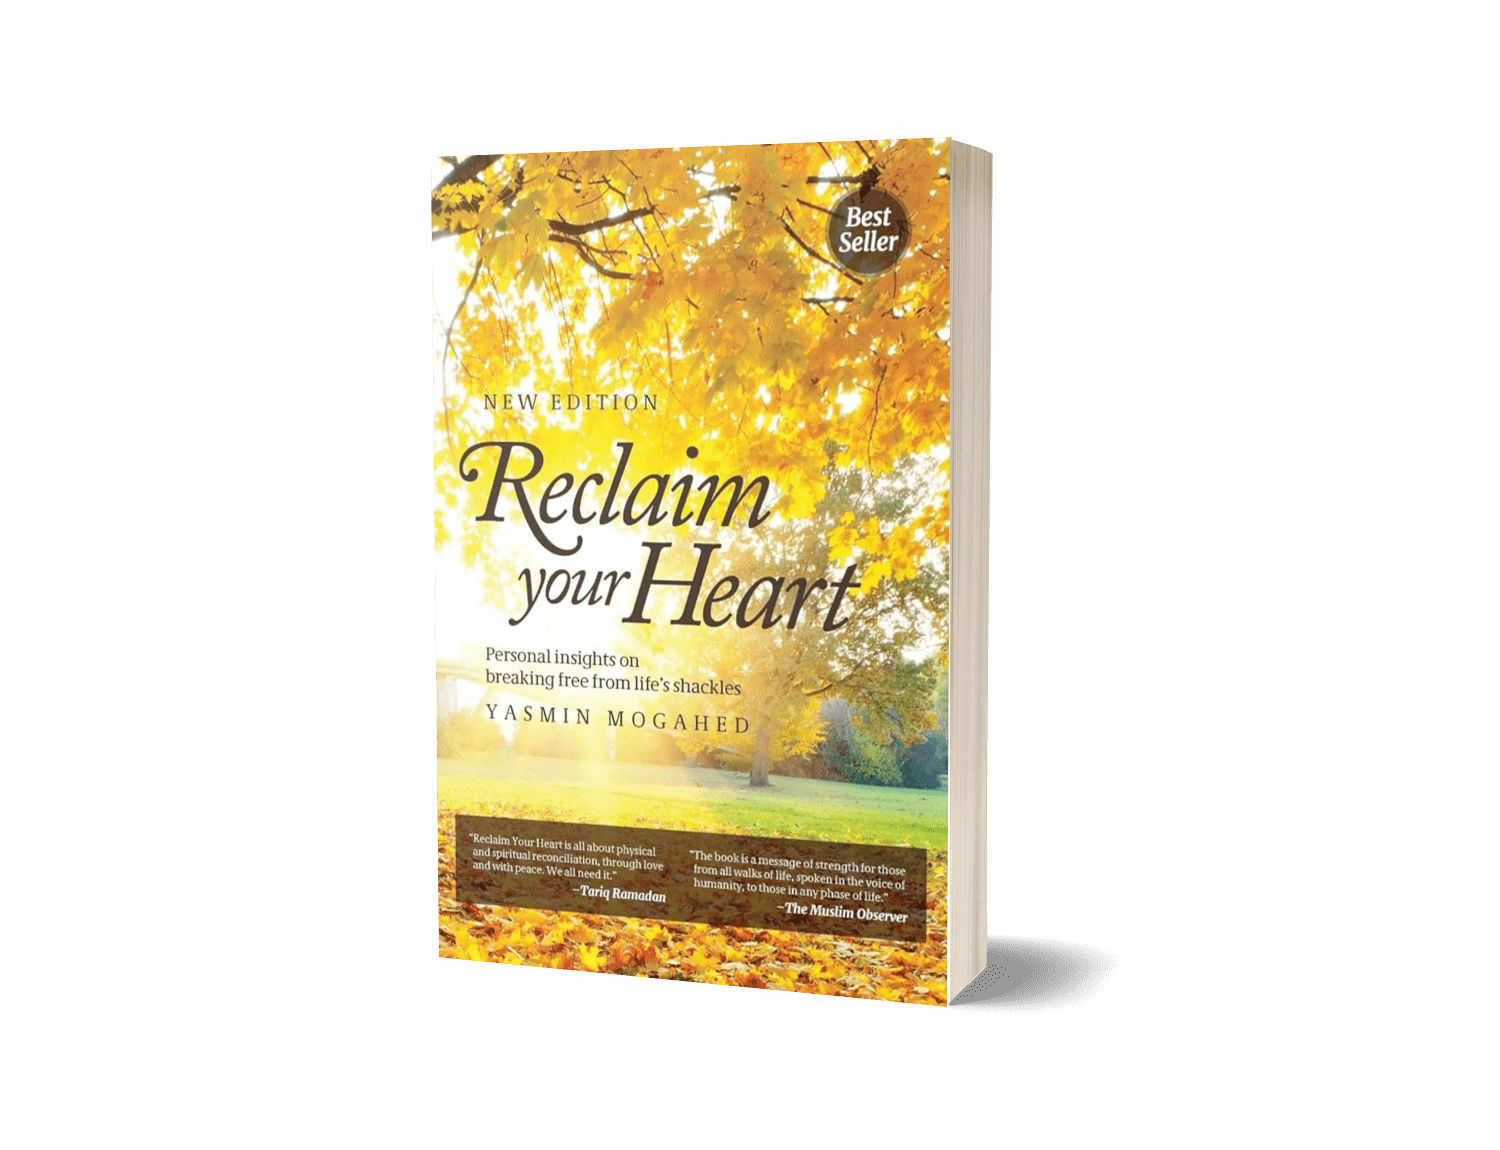 Reclaim Your Heart: Personal Insights On Breaking Free From Life's Shackles | Yasmin Mogahed